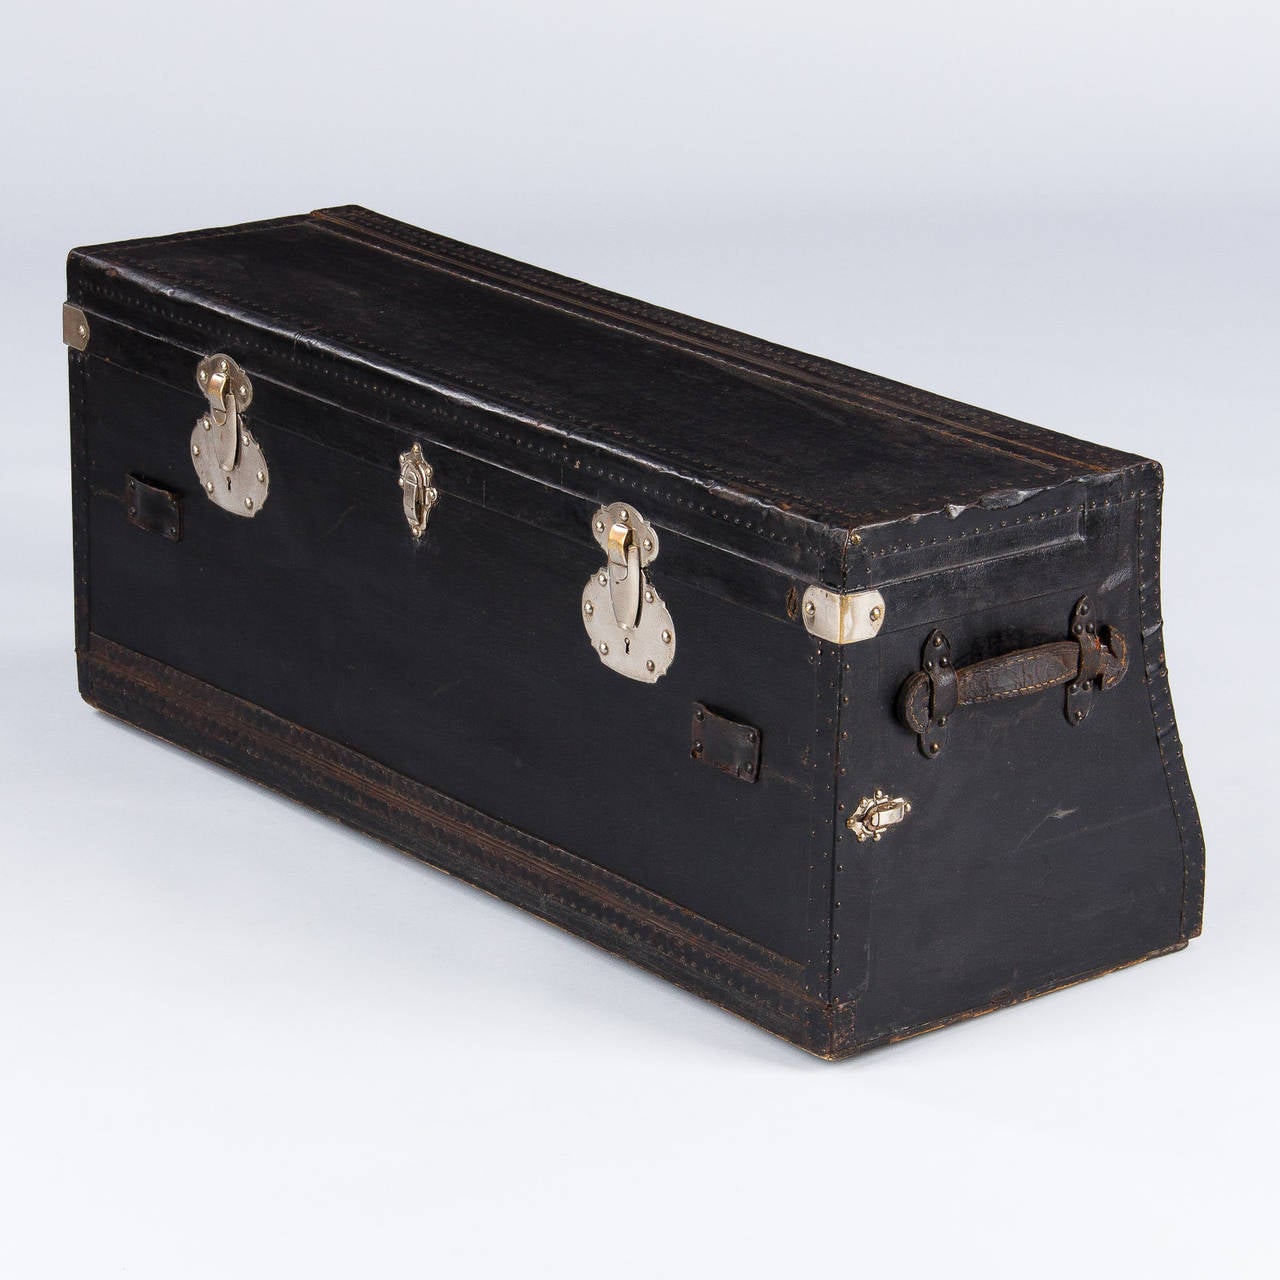 Antique French Automobile Leather Trunk, circa 1900s at 1stdibs